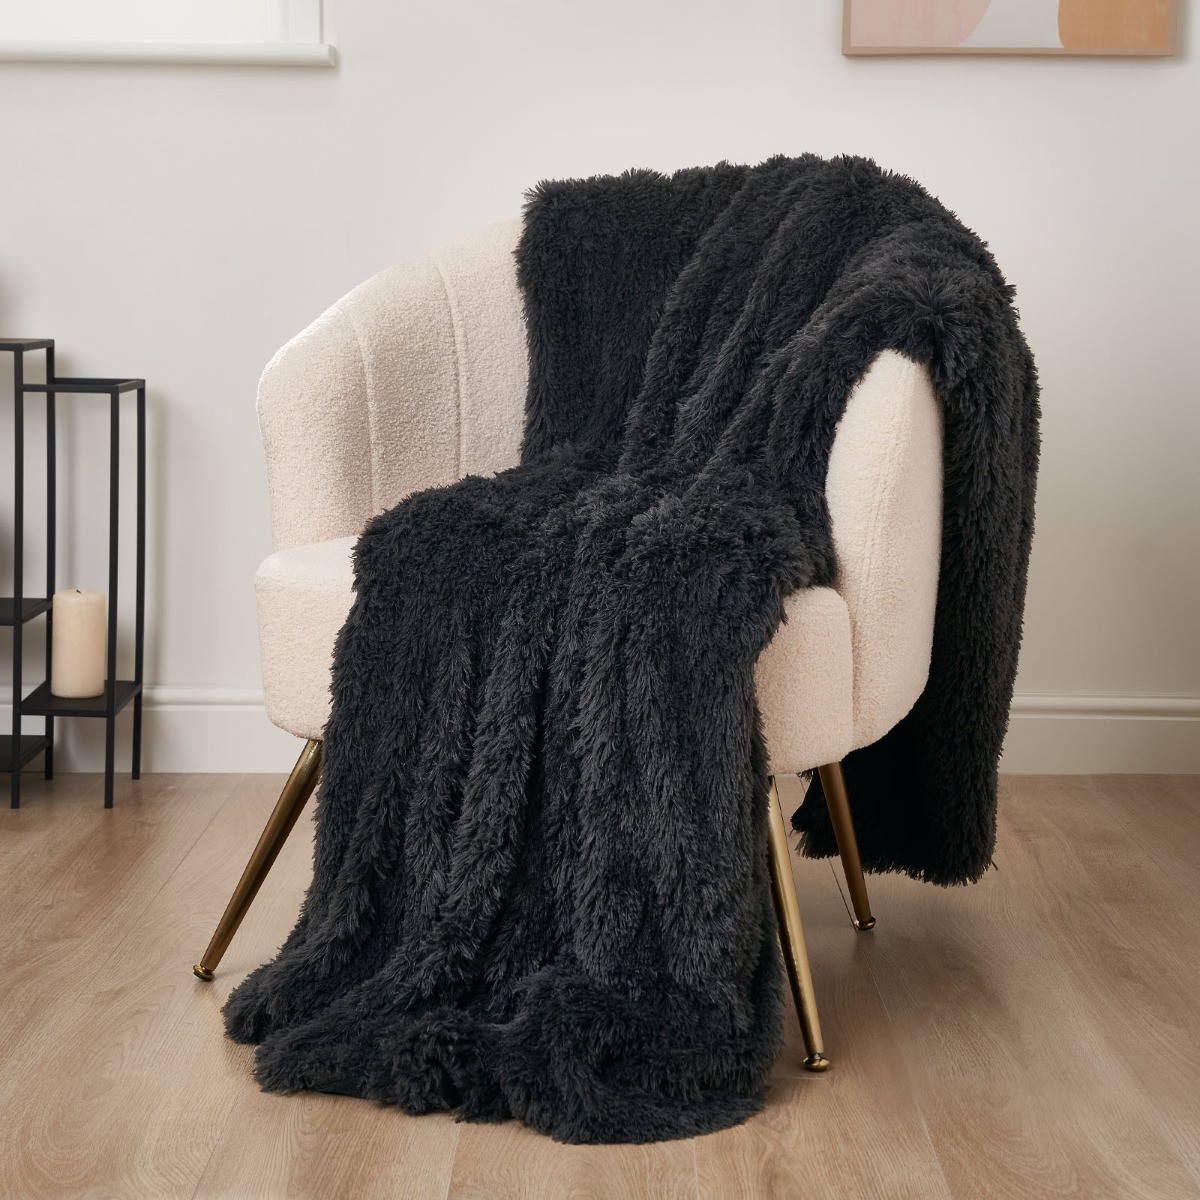 Sienna by OHS Fluffy Throw Blanket, Charcoal - 60 x 80 inches>